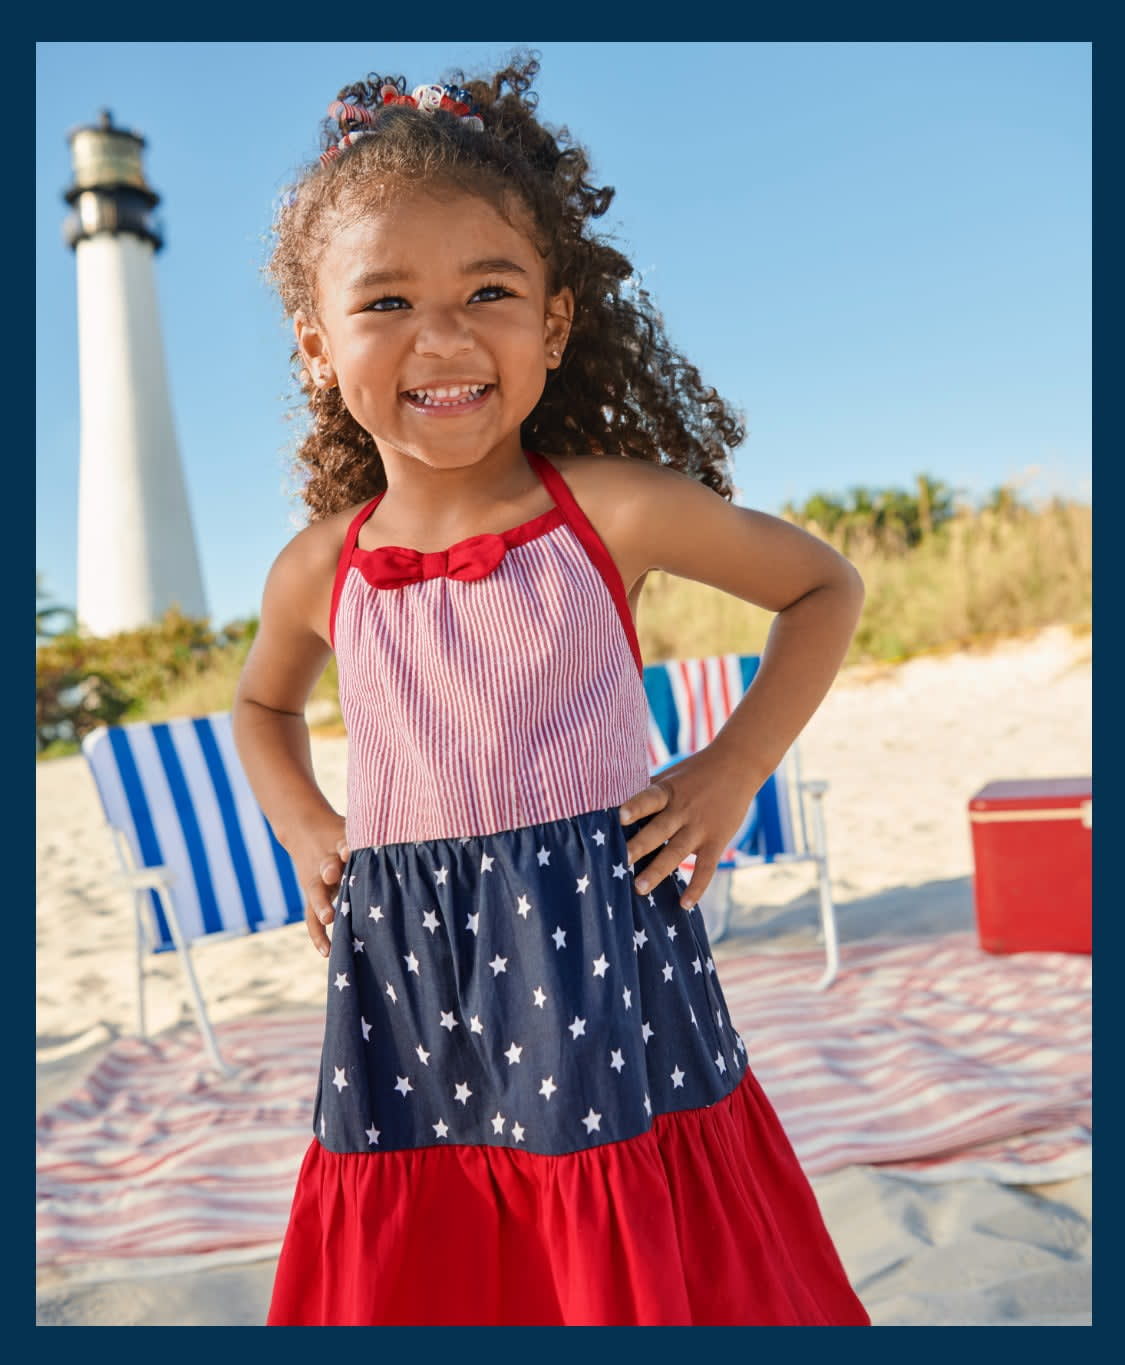 New Markdowns: Gymboree Kids Clothing Clearance 75% Off